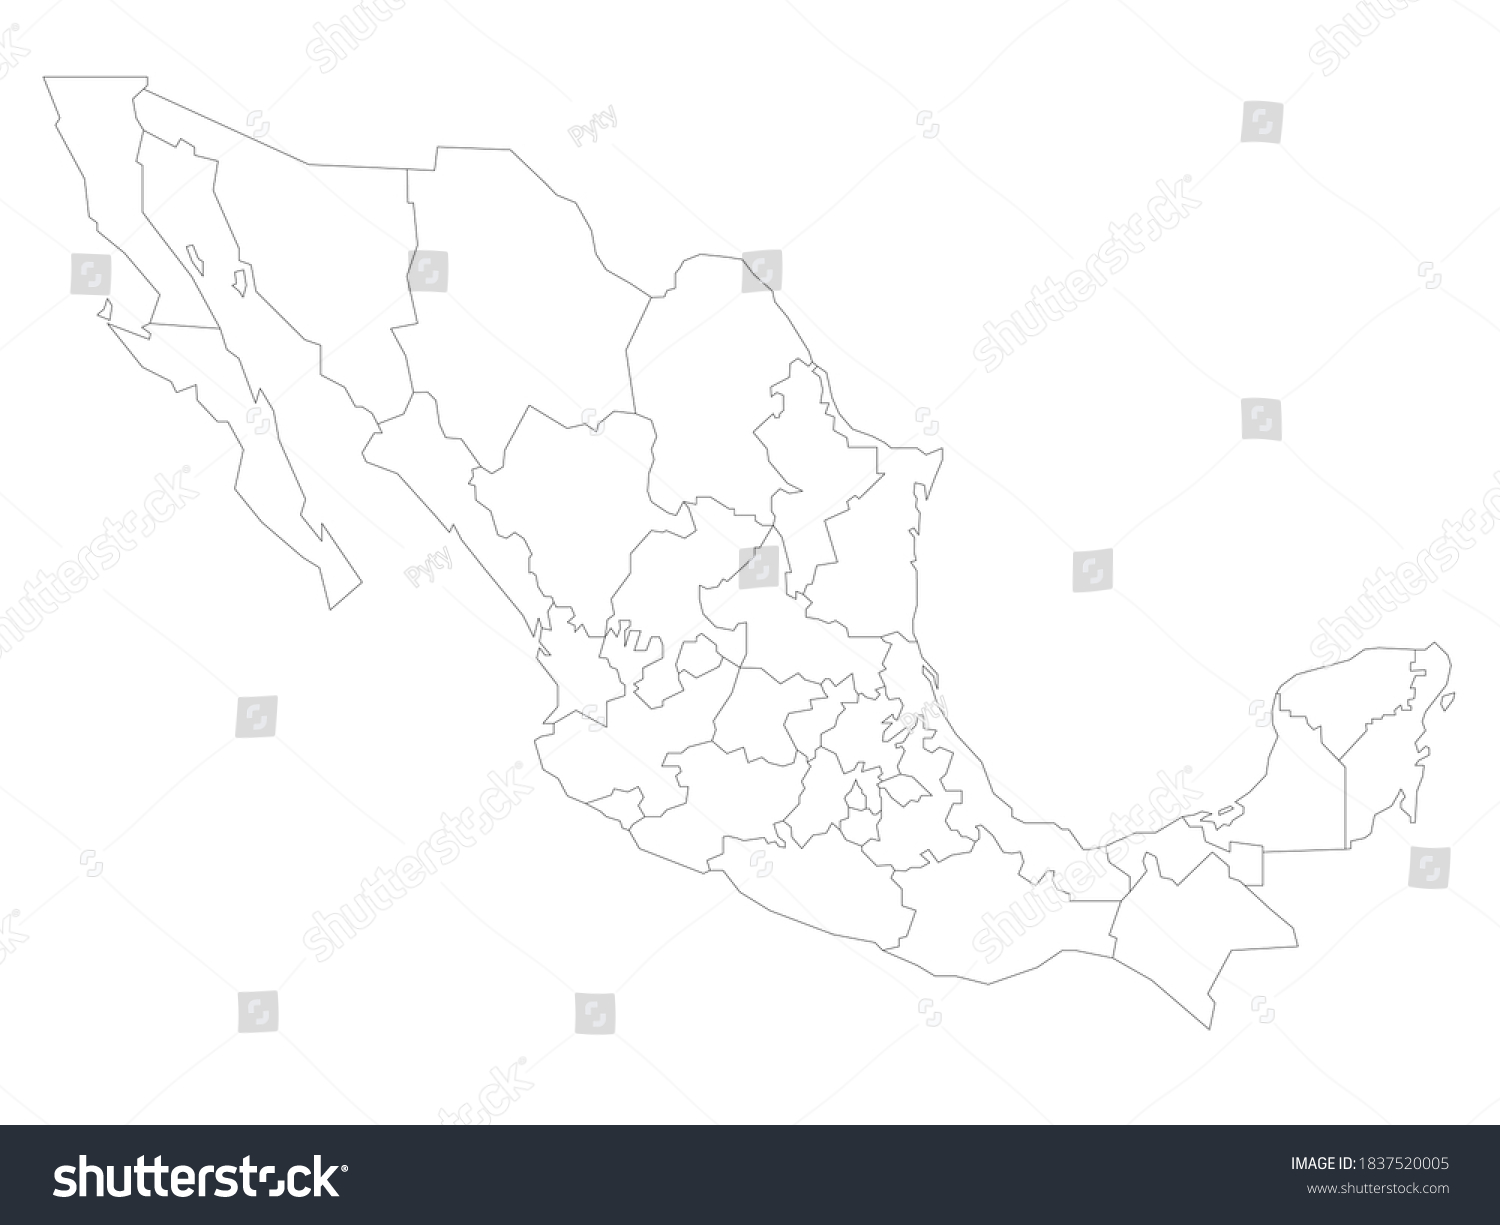 Blank political map of Mexico. Administrative - Royalty Free Stock ...